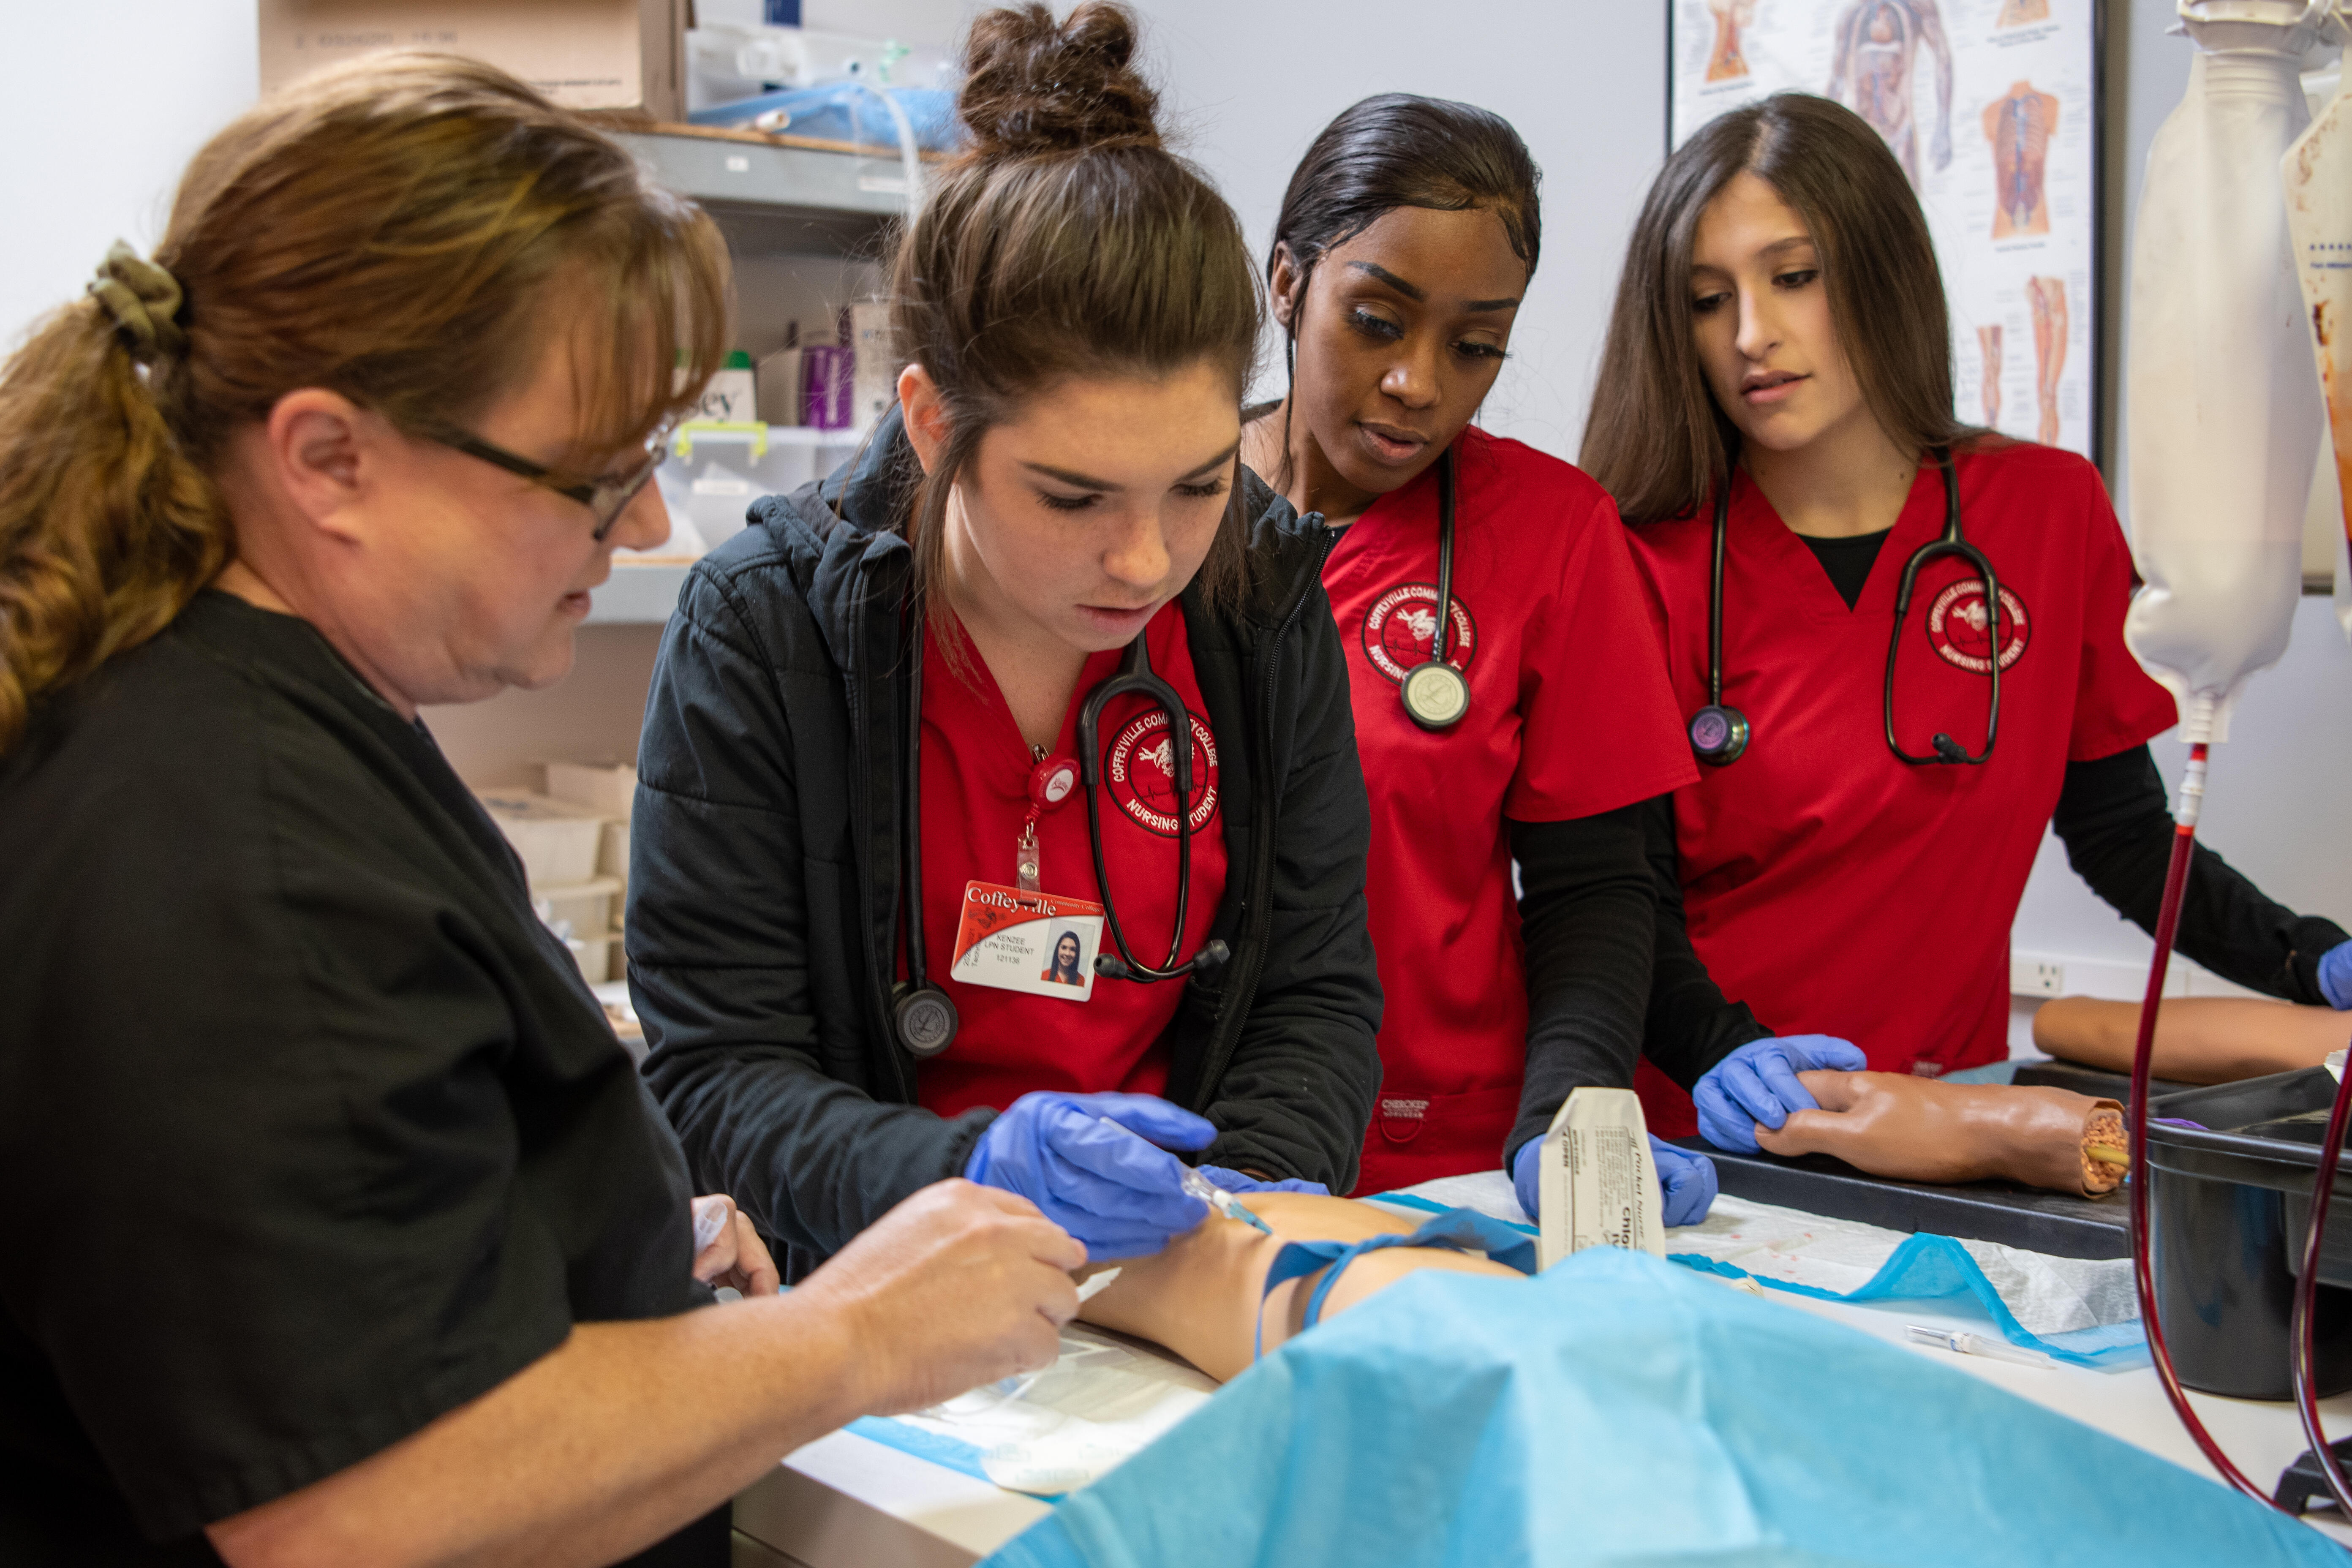 A nursing student and instructor practice taking blood on a dummy while two other student observe